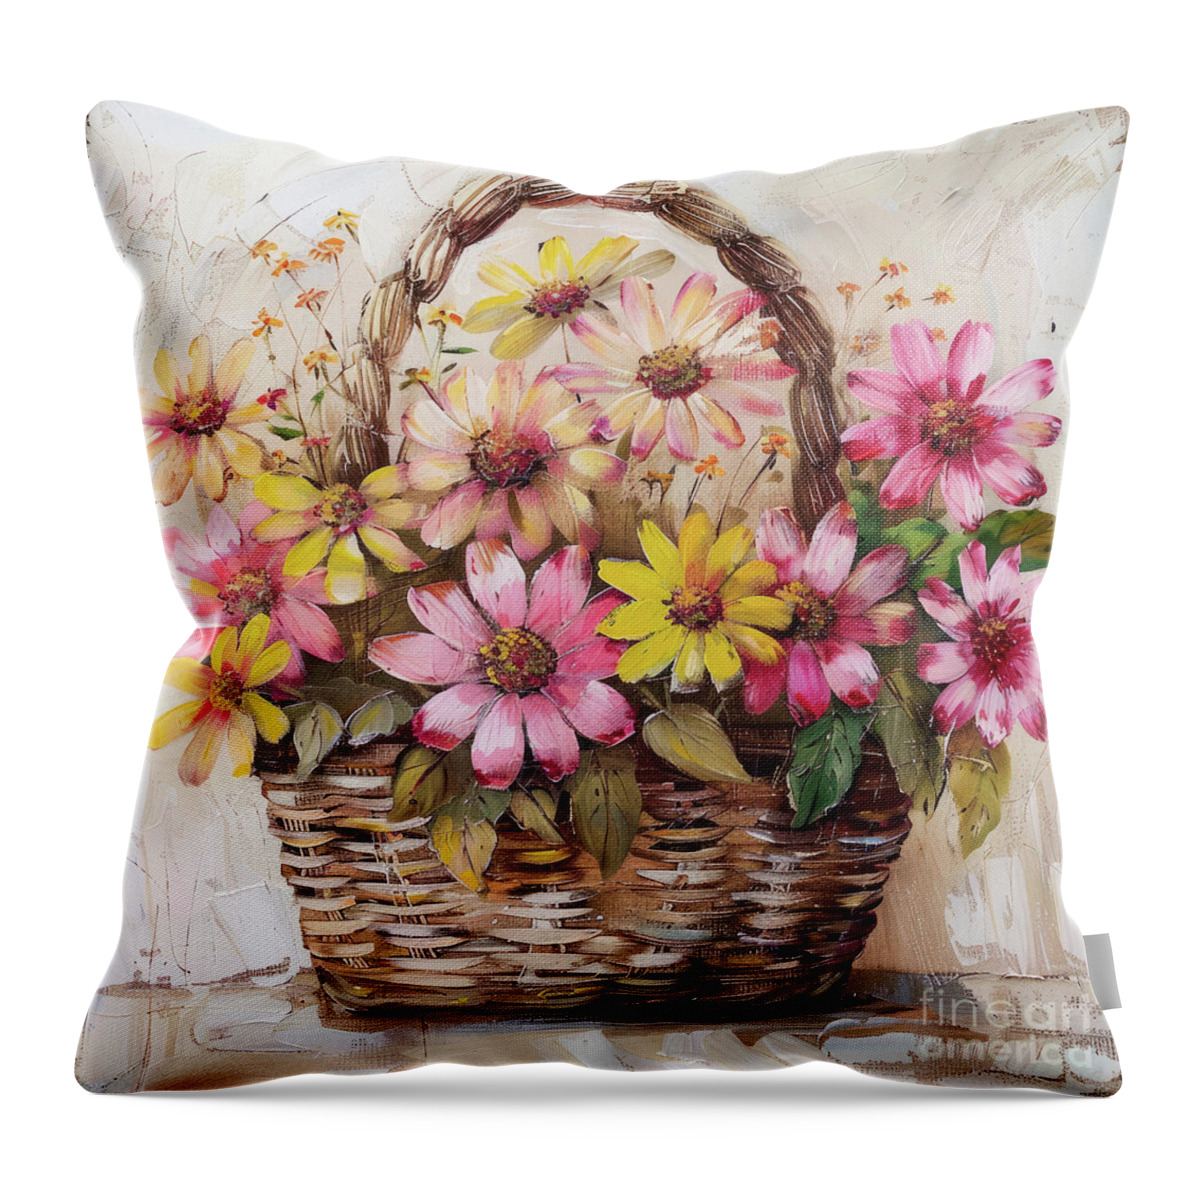 Daisy Flowers Throw Pillow featuring the digital art Pick Some Daisies by Tina LeCour